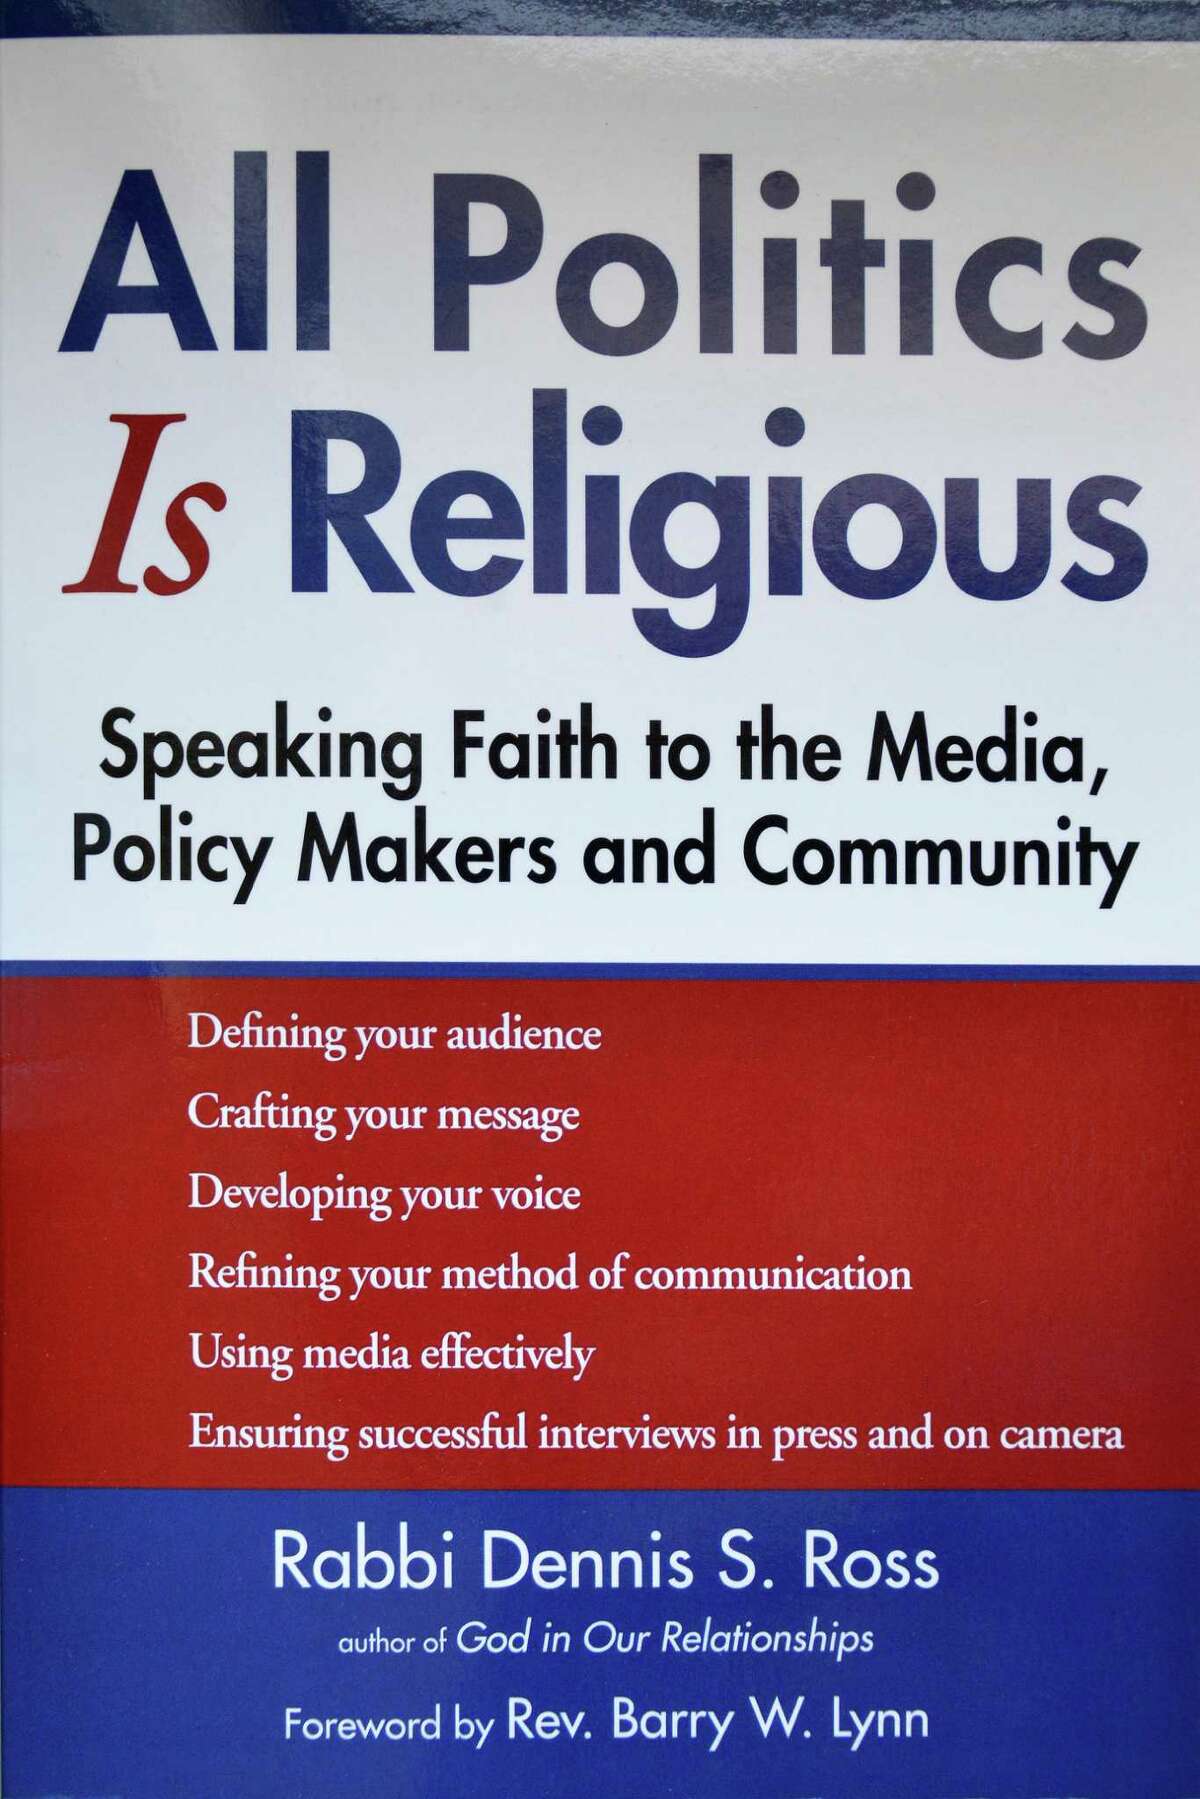 Book cover for Rabbi Dennis Ross' "All Politics Is Religious",at his Albany office Wednesday May 23, 2012. (John Carl D'Annibale / Times Union)